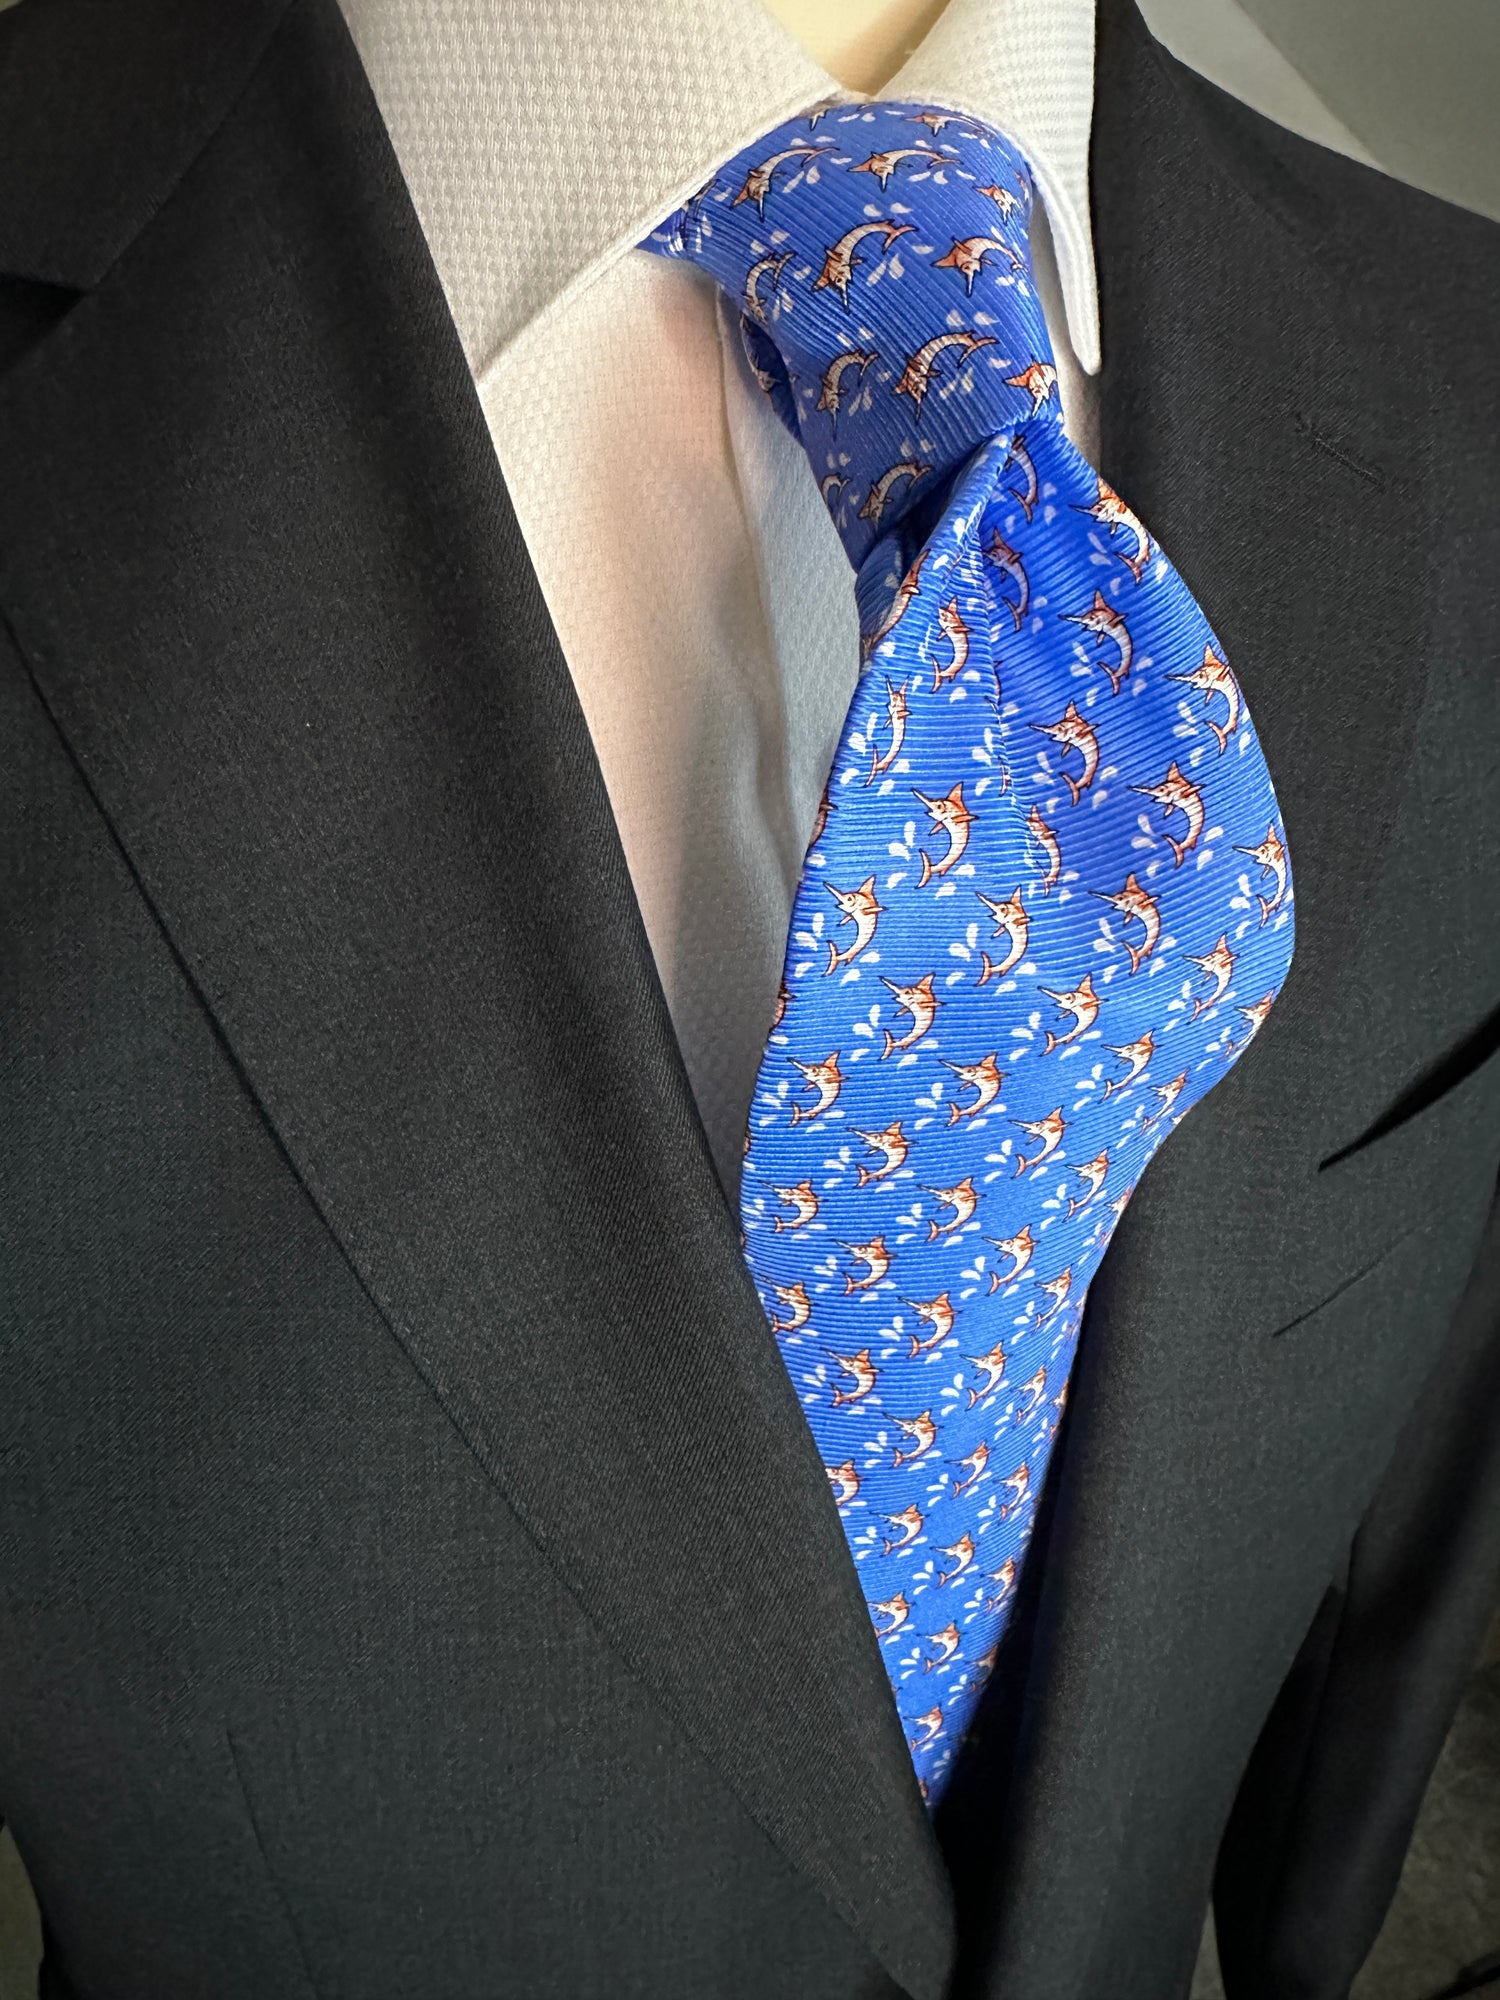 This beautiful 100% silk twill necktie features the swordfish motif with small splashes of water. Being a geometric type pattern, this tie is most interesting because people tend to look twice to realize that the pattern is made up of orange/tan swordfish. Hermes style..